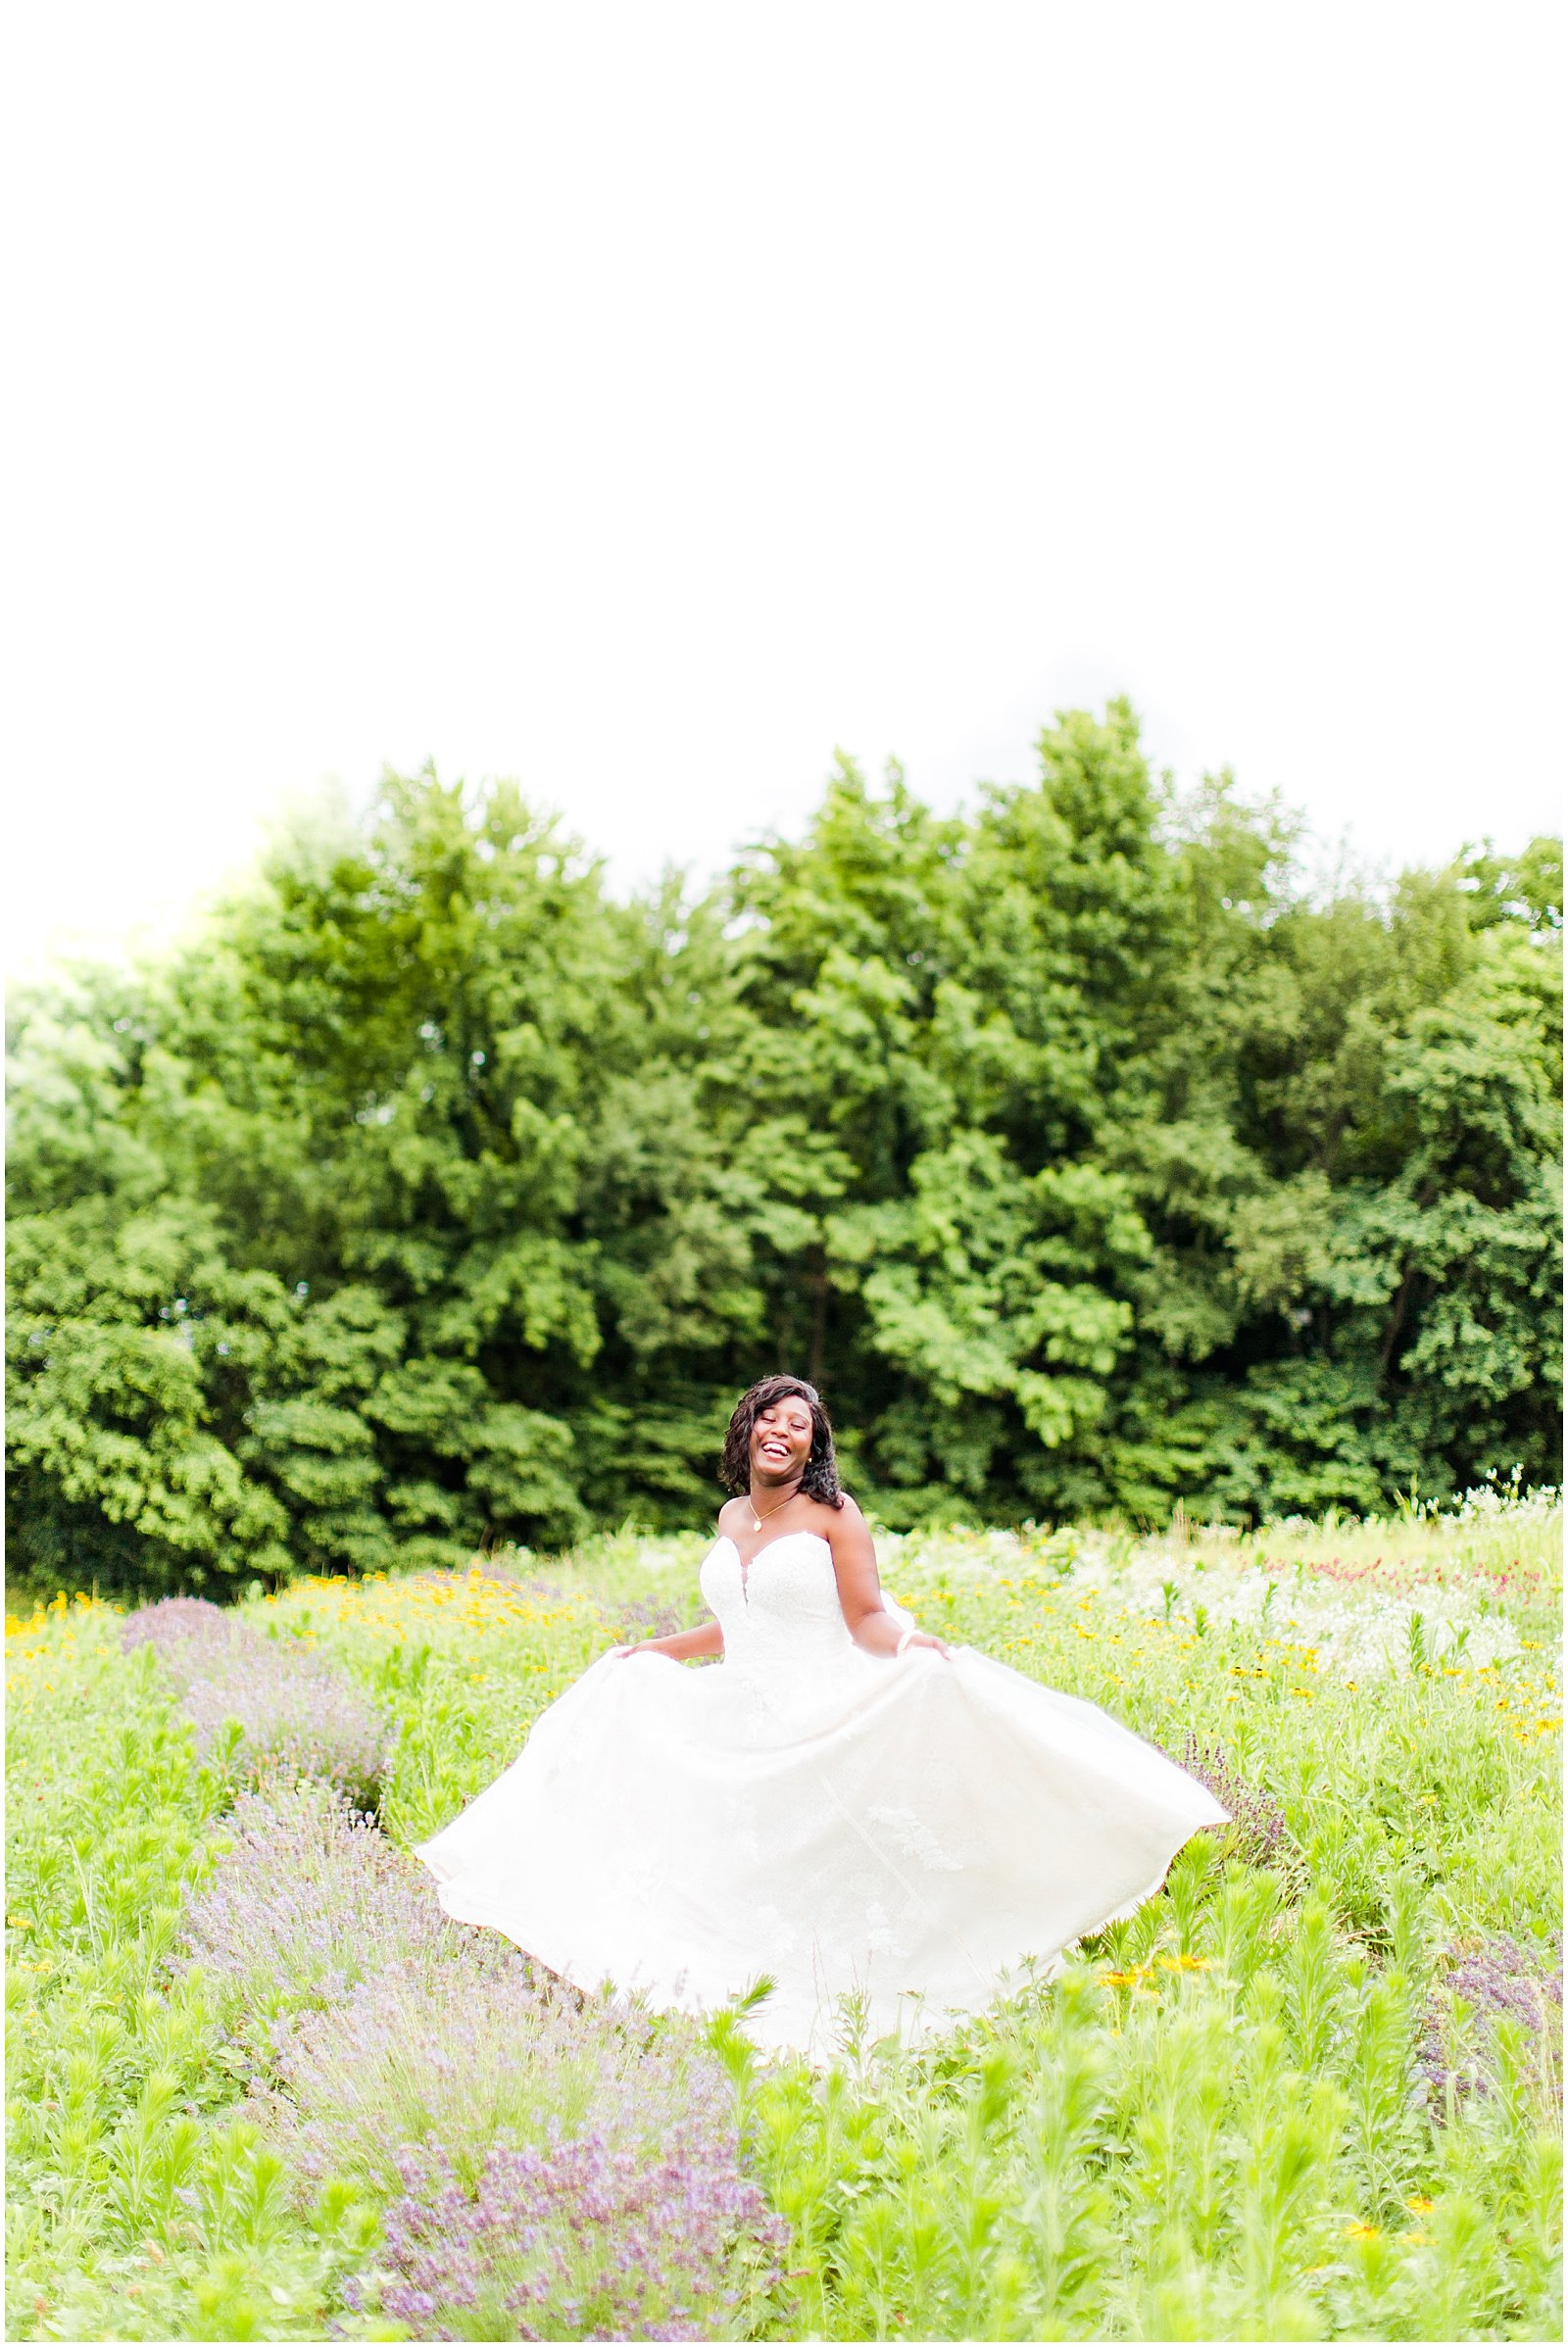 Bret and Brandie Photography | Styled Shoot at White Chateau | Blog 0050.jpg